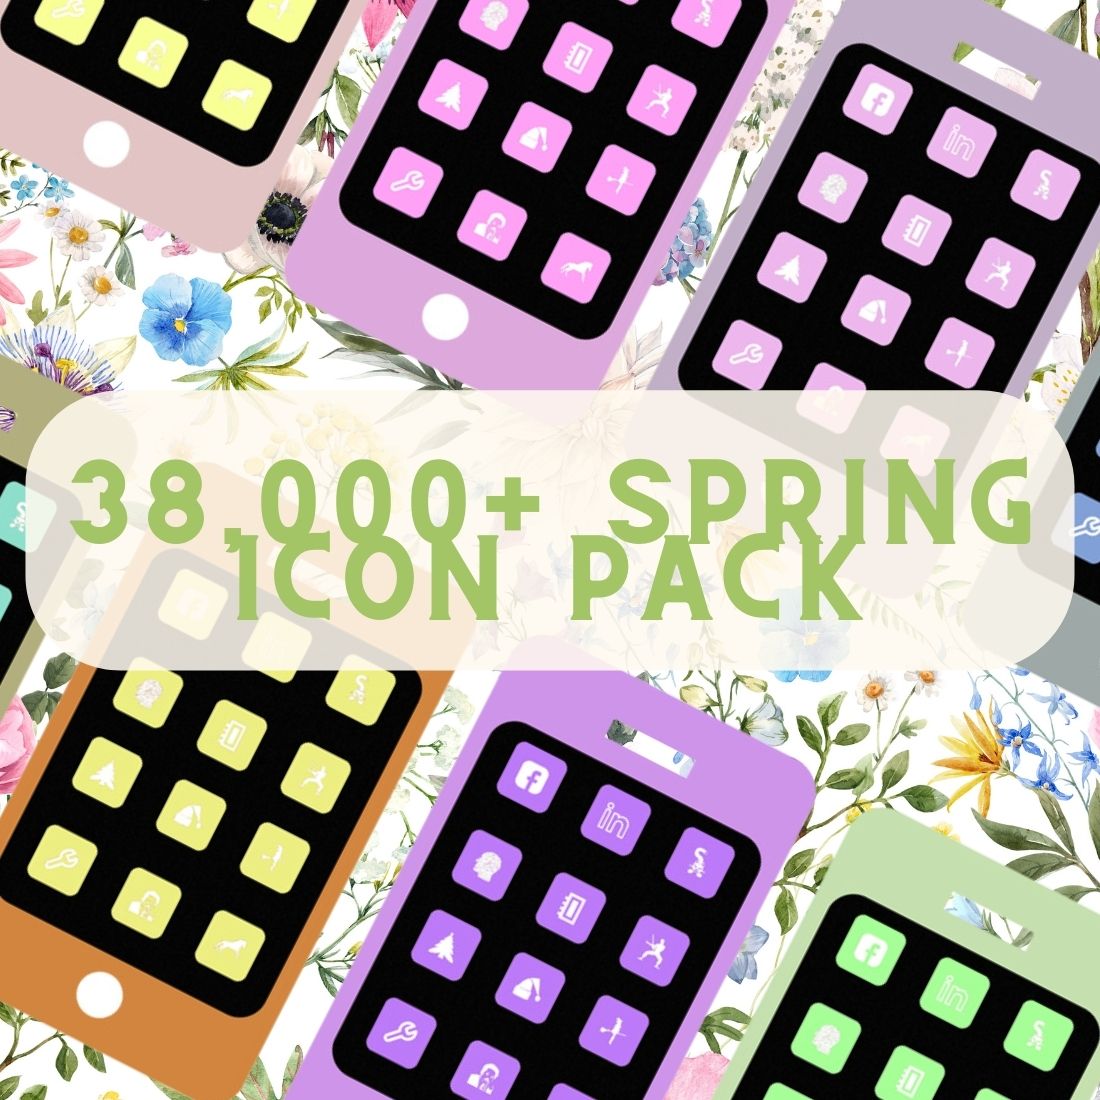 SPRING ICONS PACK cover image.